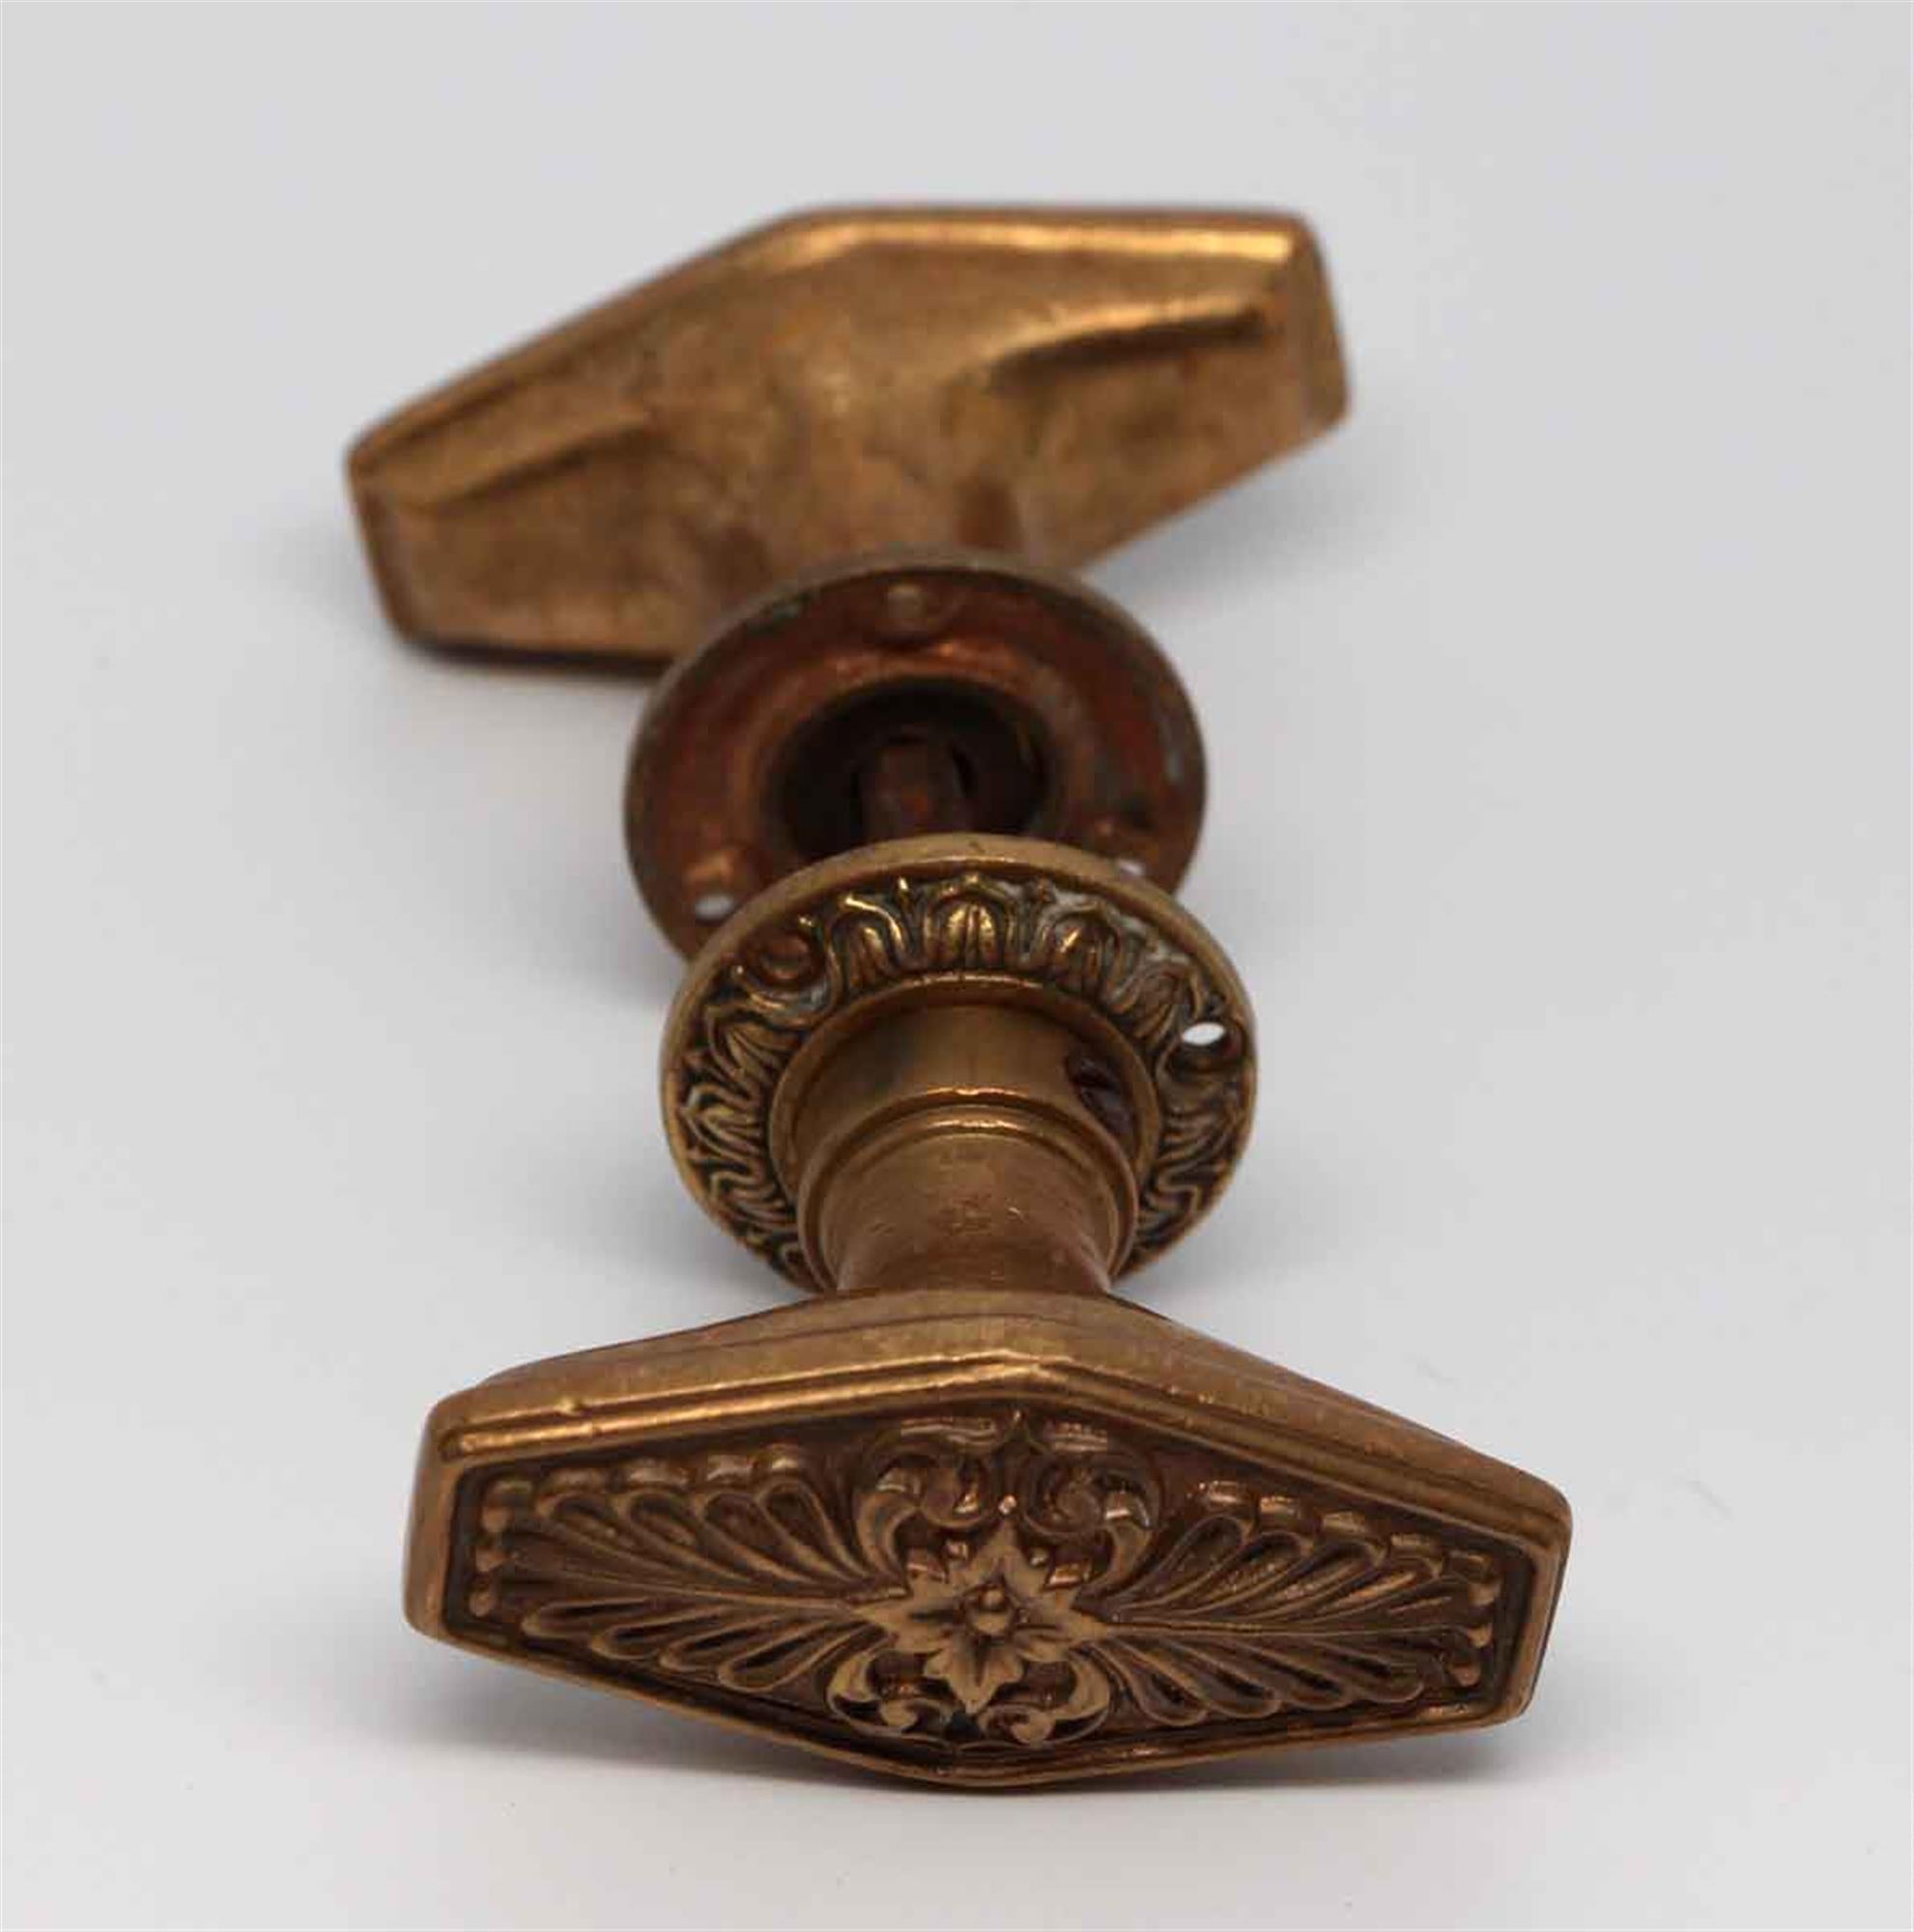 Two fold oval bronze doorknob set made by Russell & Erwin. In their 1931 catalog labeled part of the N-10400 group. This is a special design for the Waldorf Astoria Hotel in New York City. Set includes two knobs with a spindle and two rosettes.